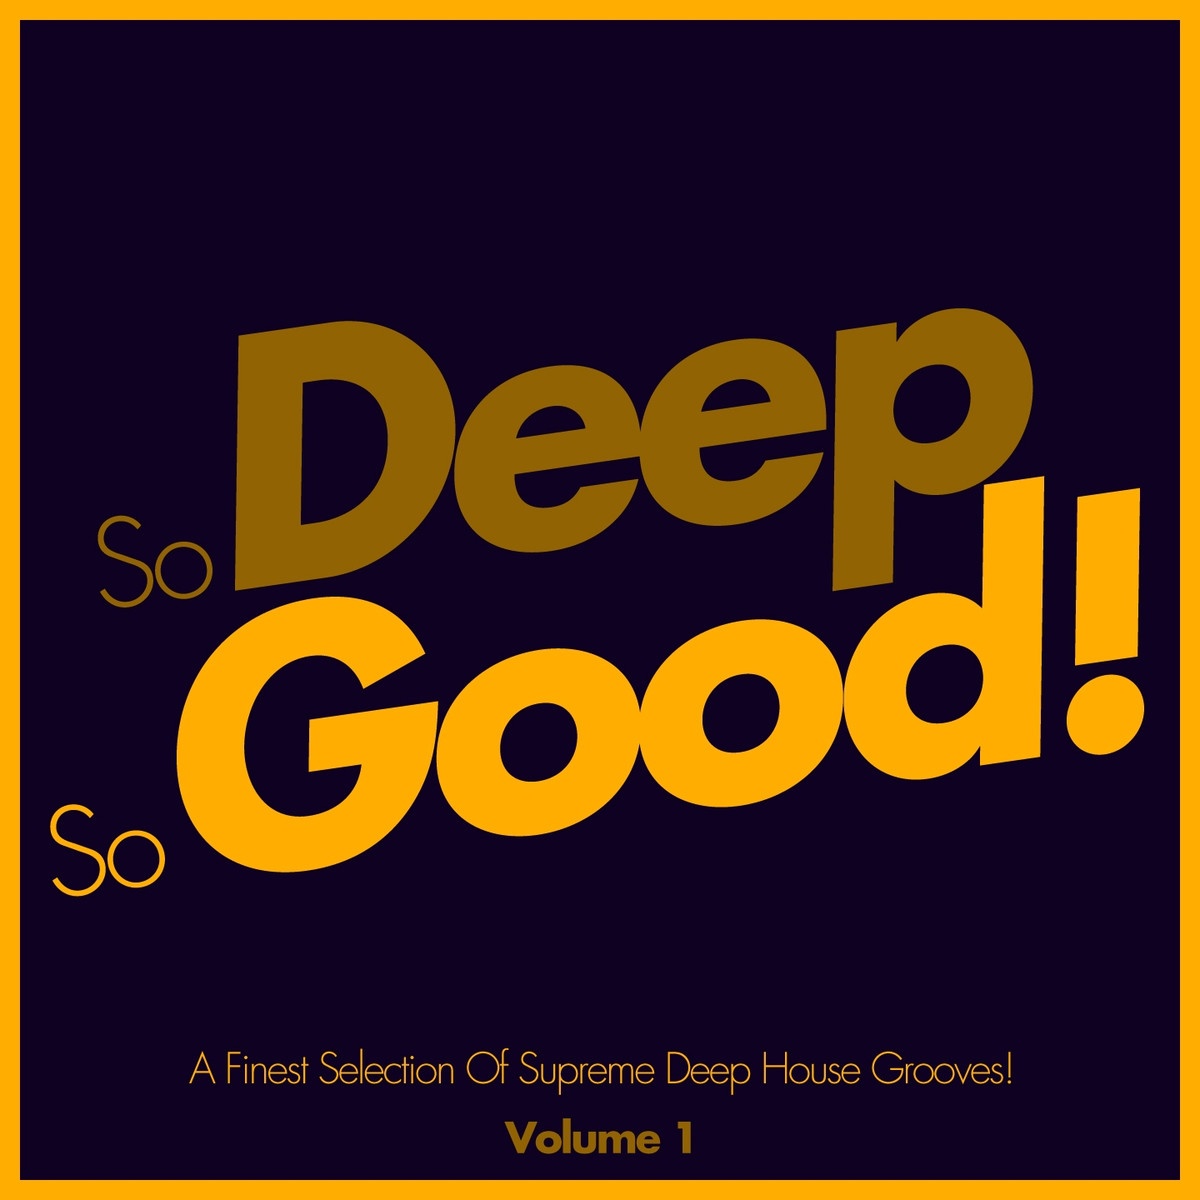 So Deep, So Good! - a Finest Selection of Supreme Deep House Grooves, Vol. 1